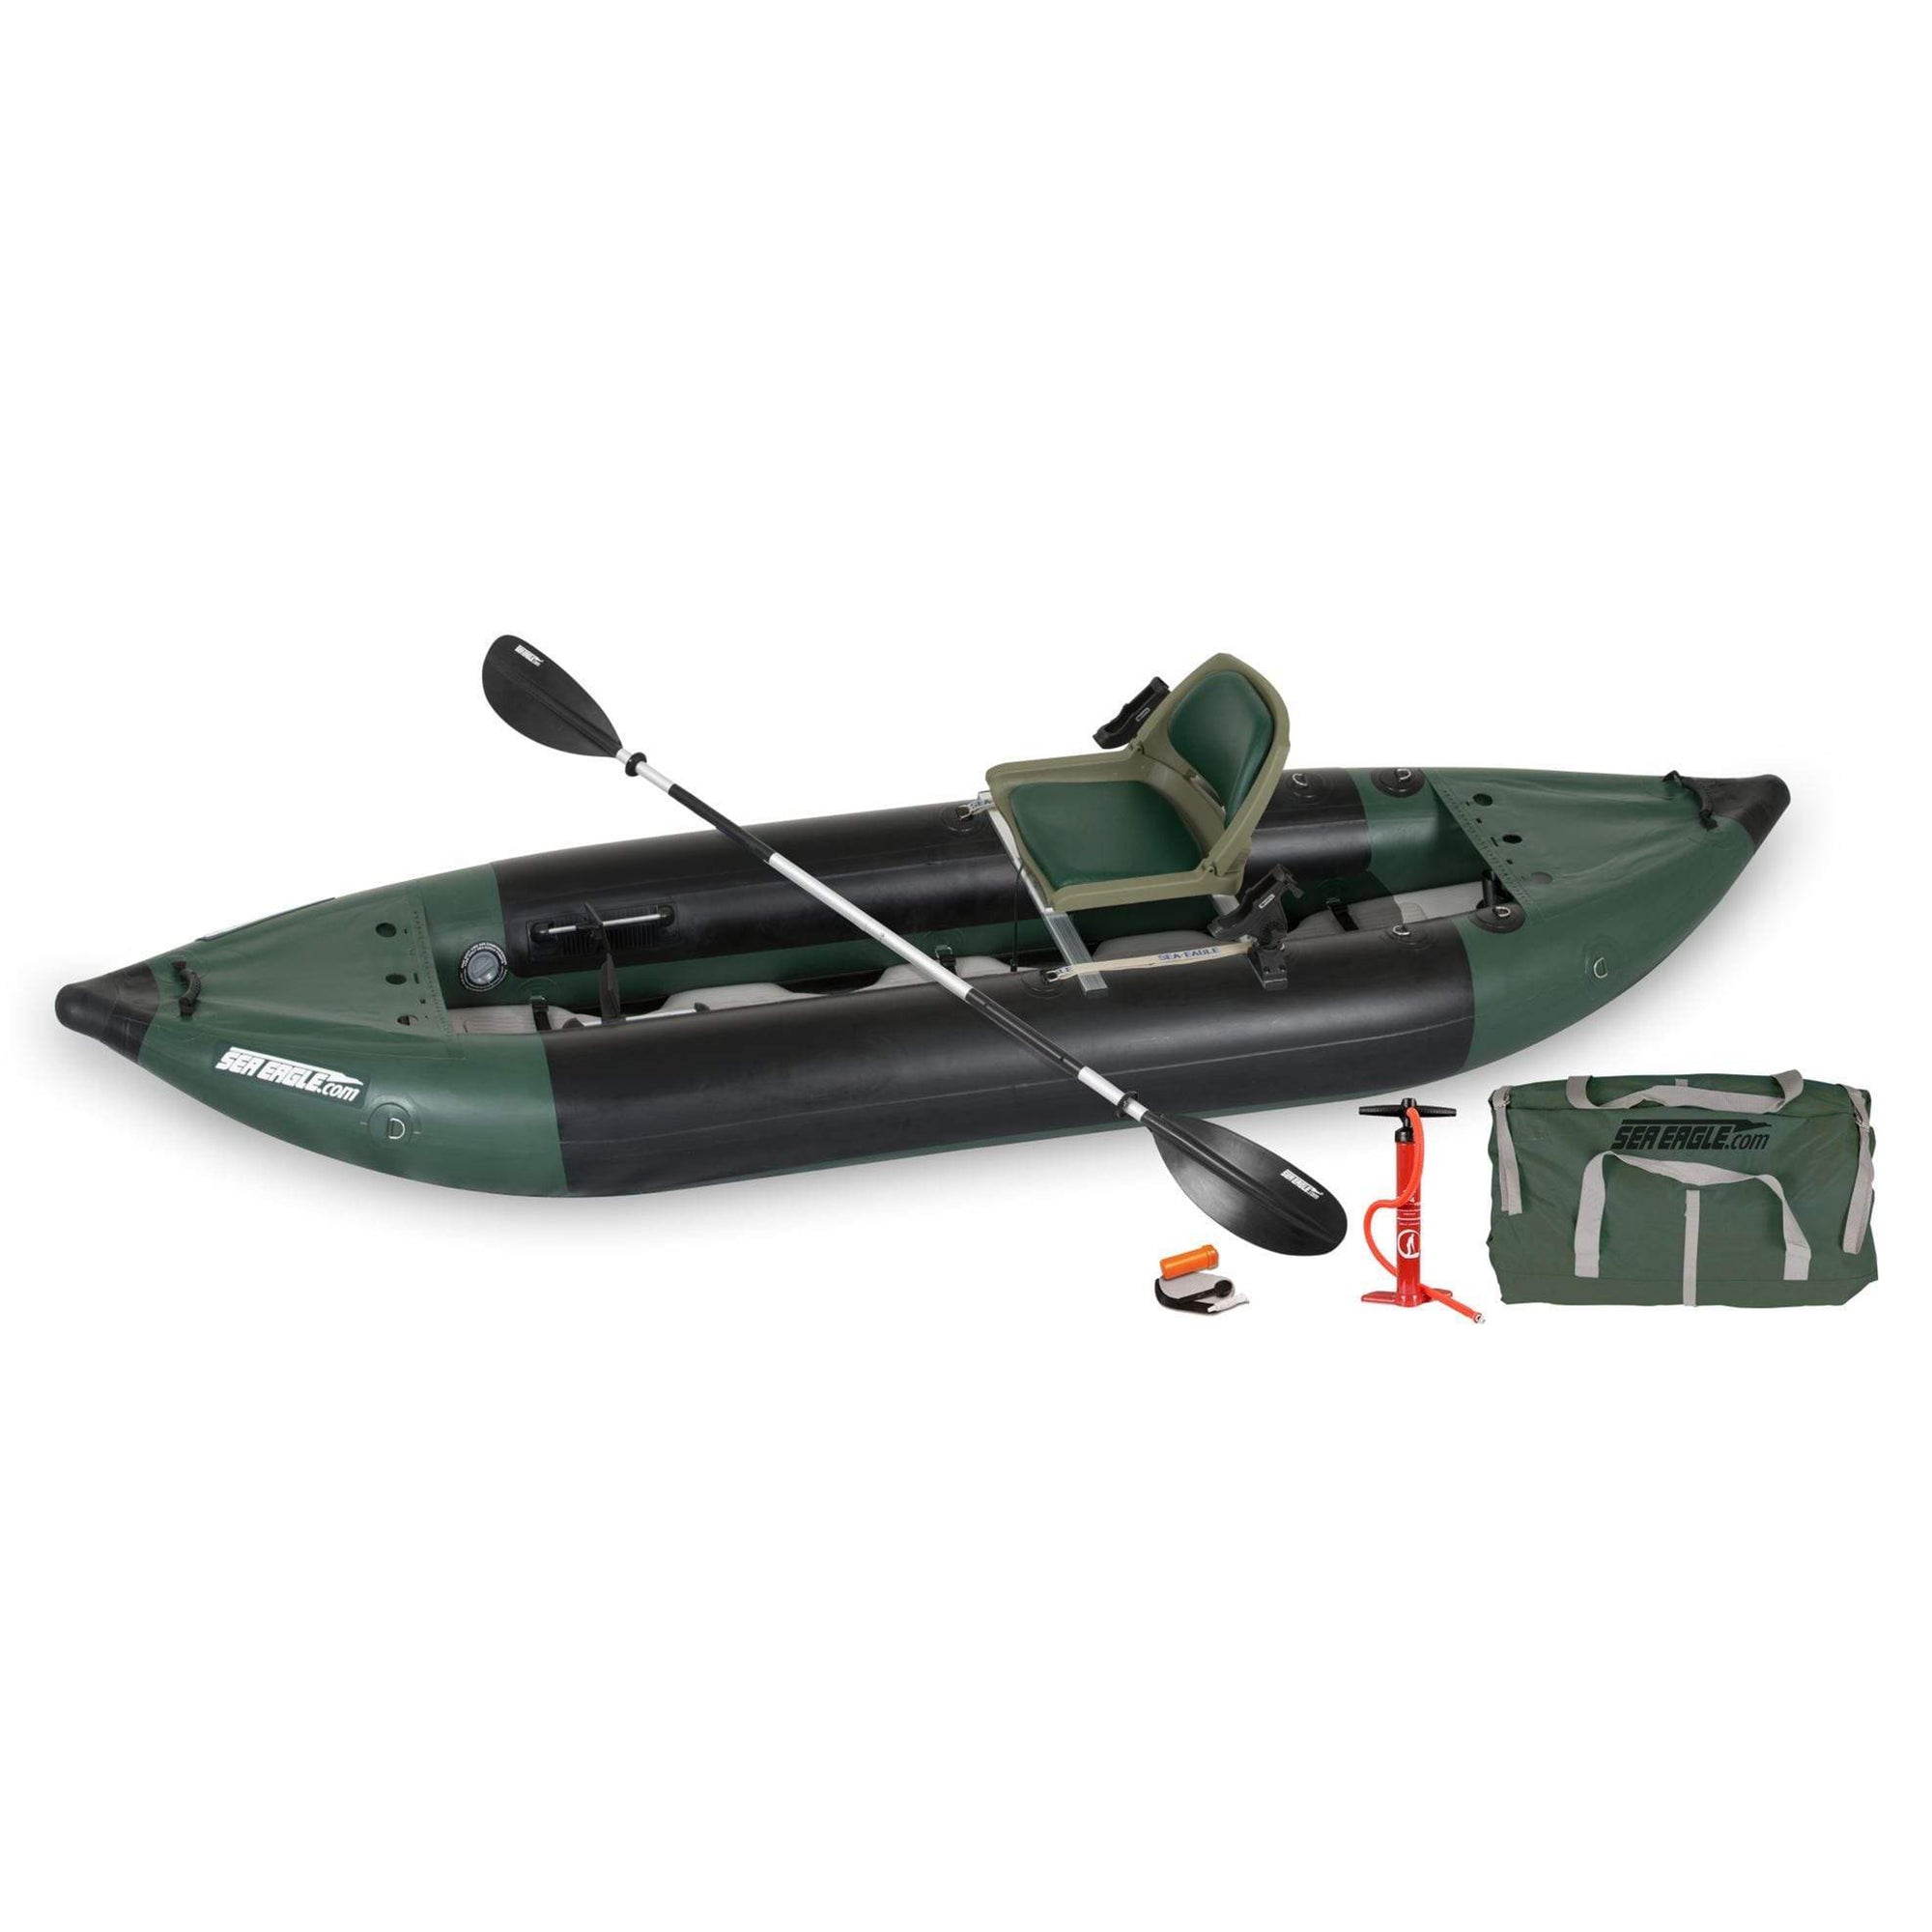 Sea Eagle FS126 Inflatable Fishing Rig Stand Up Paddleboard